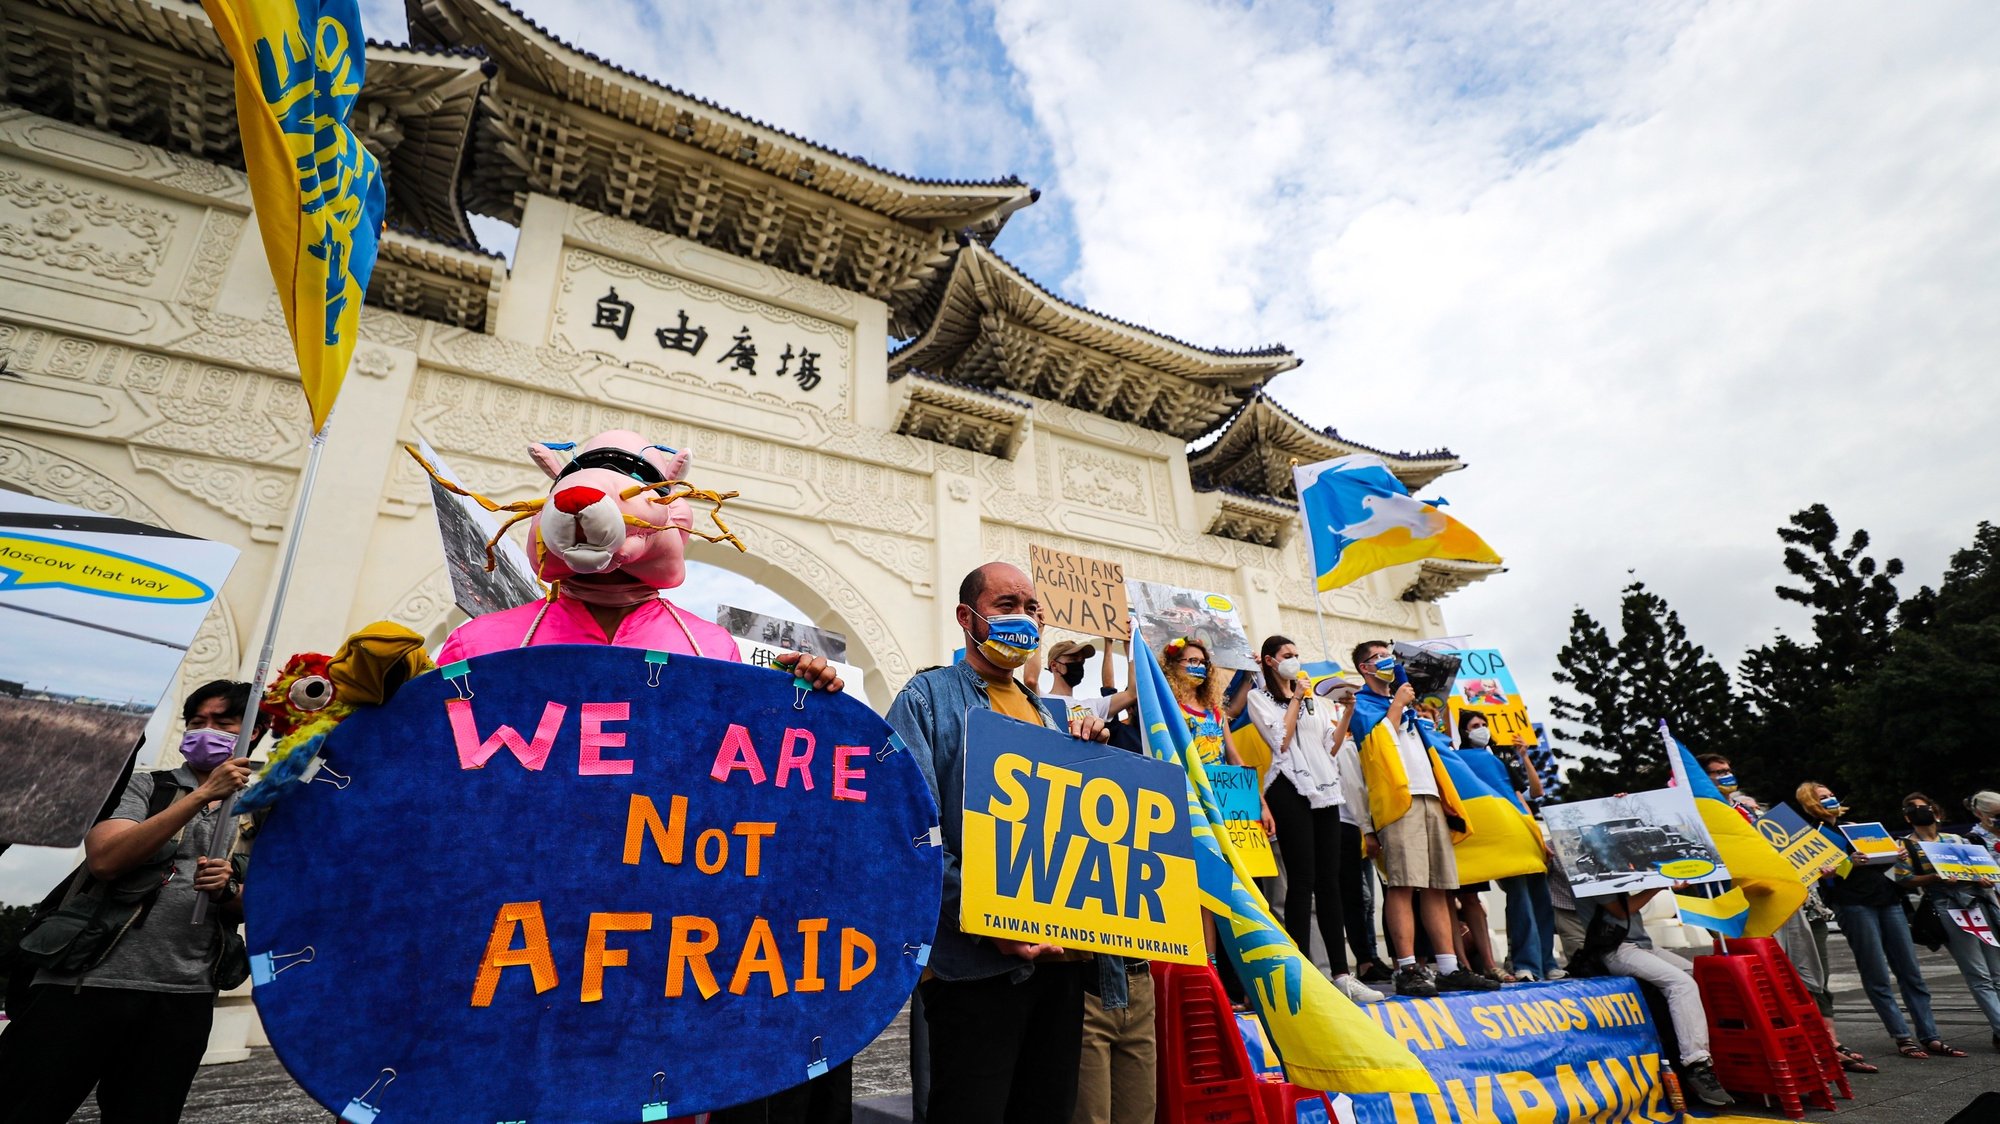 epa09933171 Protesters display placards and photos of war in Ukraine in front of the Liberty Square during a Victory Parade organized by Ukainians, in Taipei, Taiwan, 08 May 2022. Ukrainian citizens are calling the international community to support Ukraine against the Russian military campaign in the country.  EPA/RITCHIE B. TONGO